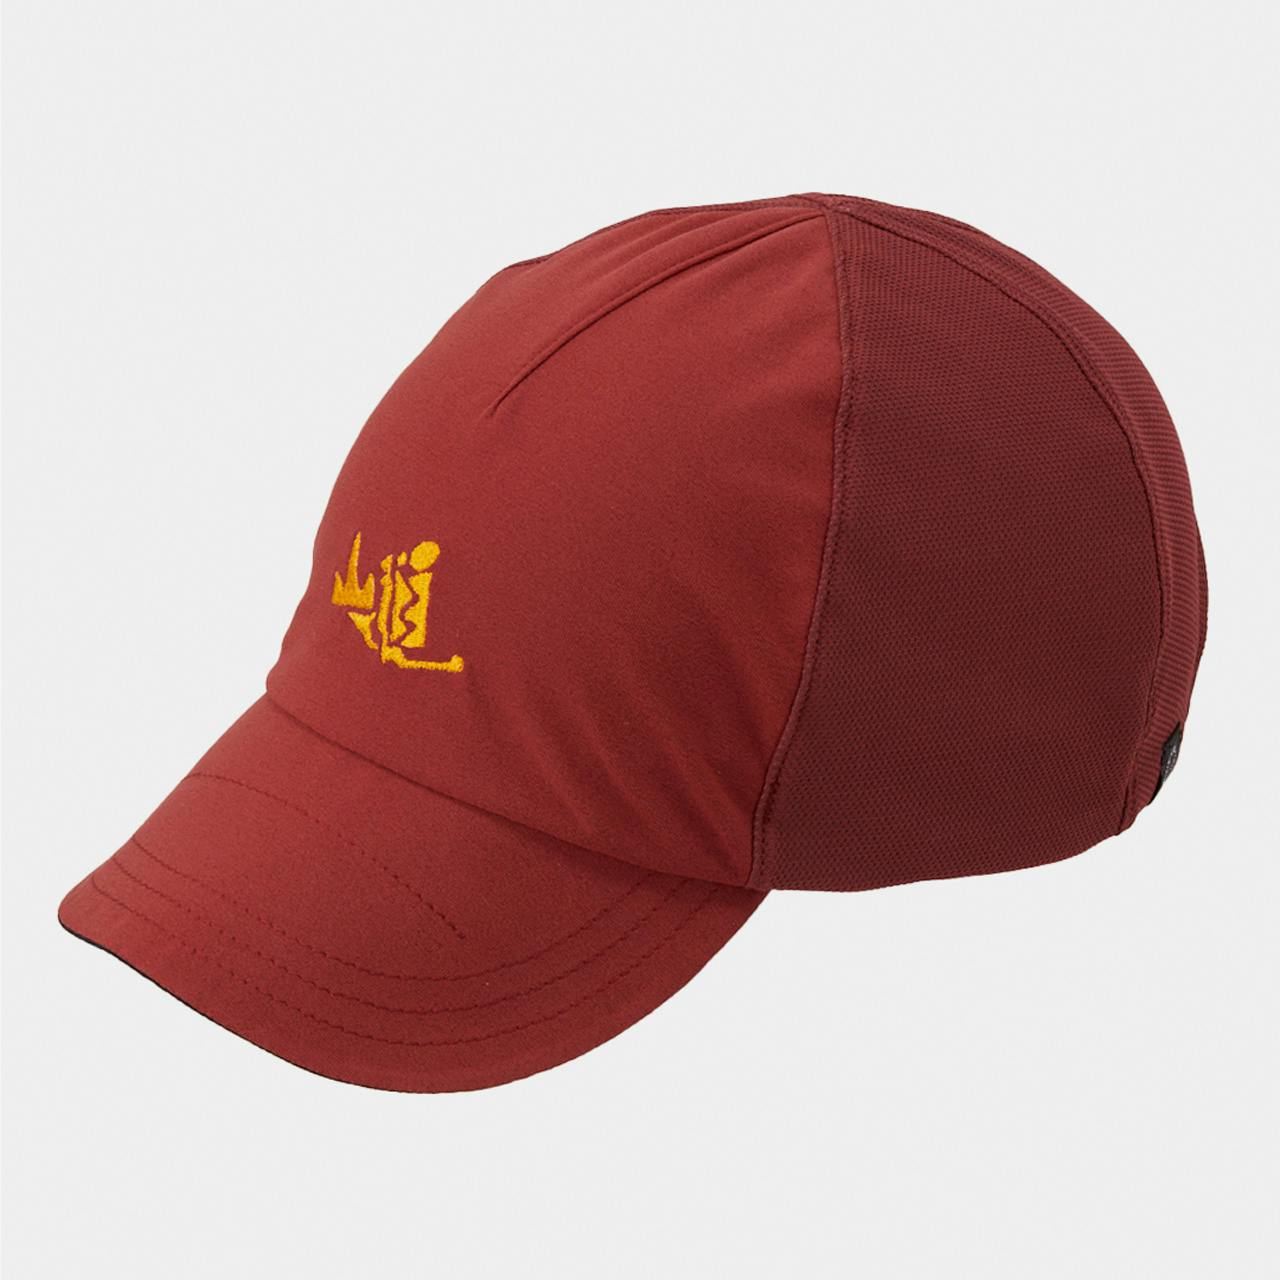 NEW Yamatomichi Cap<br>Available for Preorder